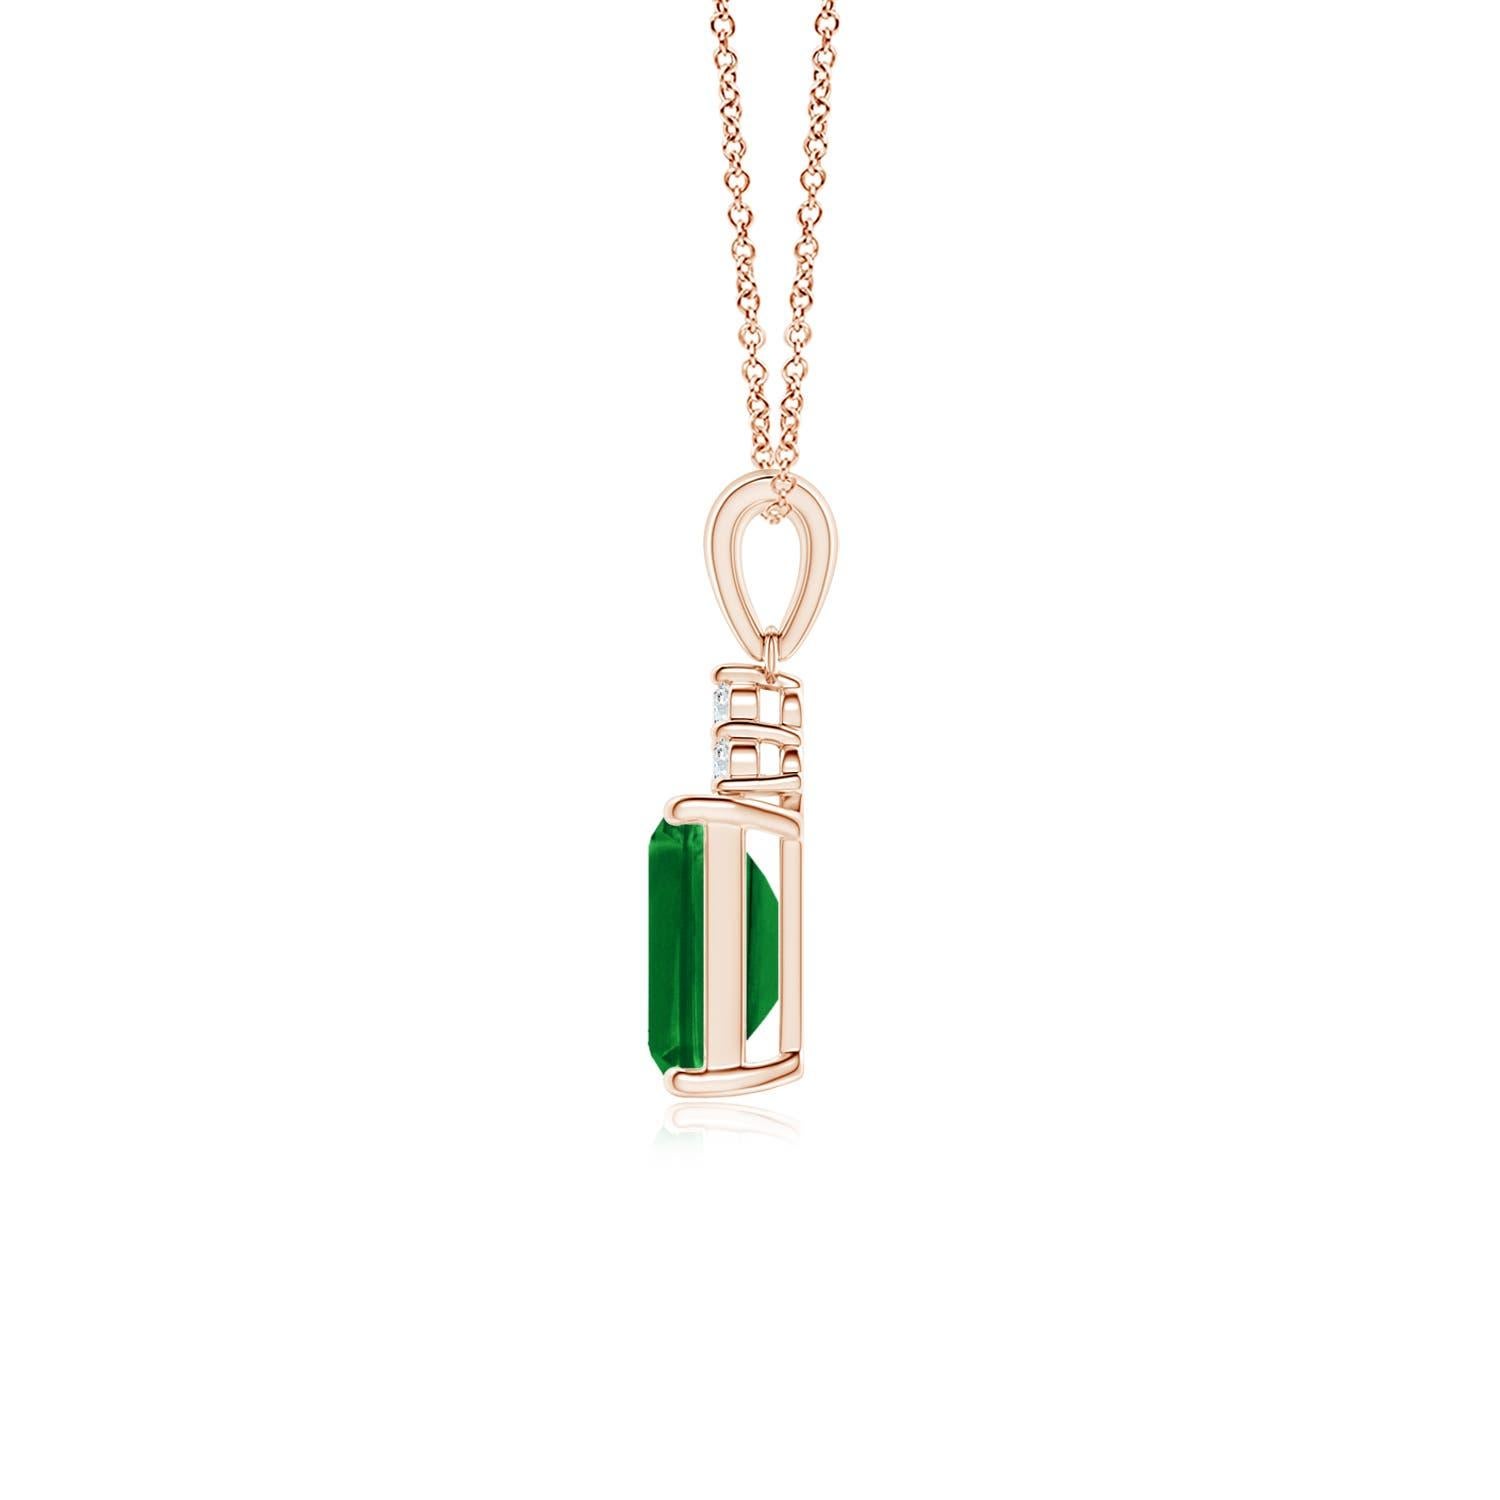 A stunning emerald-cut emerald sits pretty in a four-prong setting, topped by a glimmering cluster of diamonds. The rich green gemstone is enhanced by the brilliance of the sparkling white diamonds. This exquisite emerald dangle pendant is an